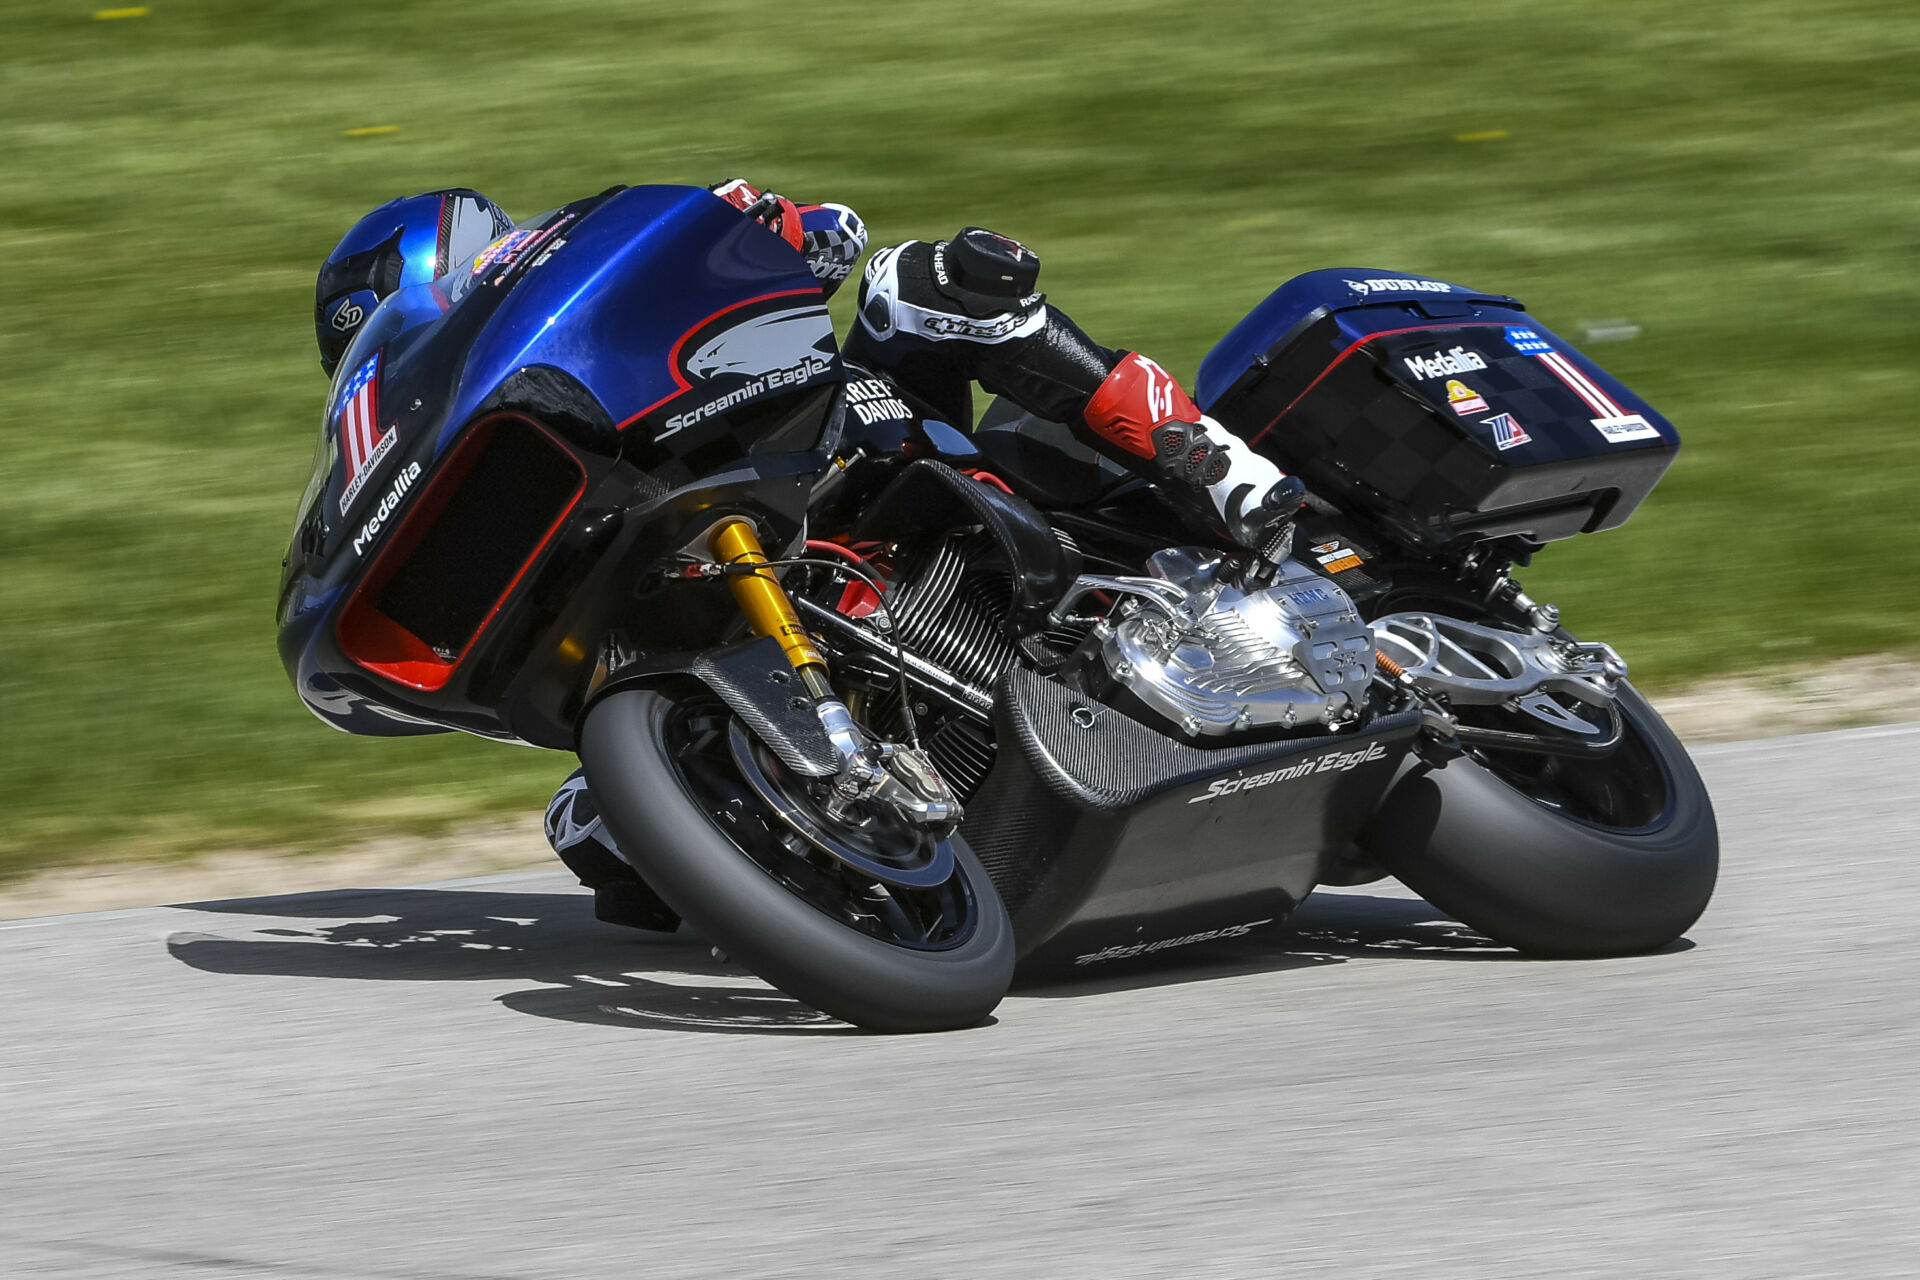 Kyle Wyman (1) on his Screamin' Eagle Harley-Davidson Road Glide earlier in the weekend at Road America. Photo by Brian J. Nelson.